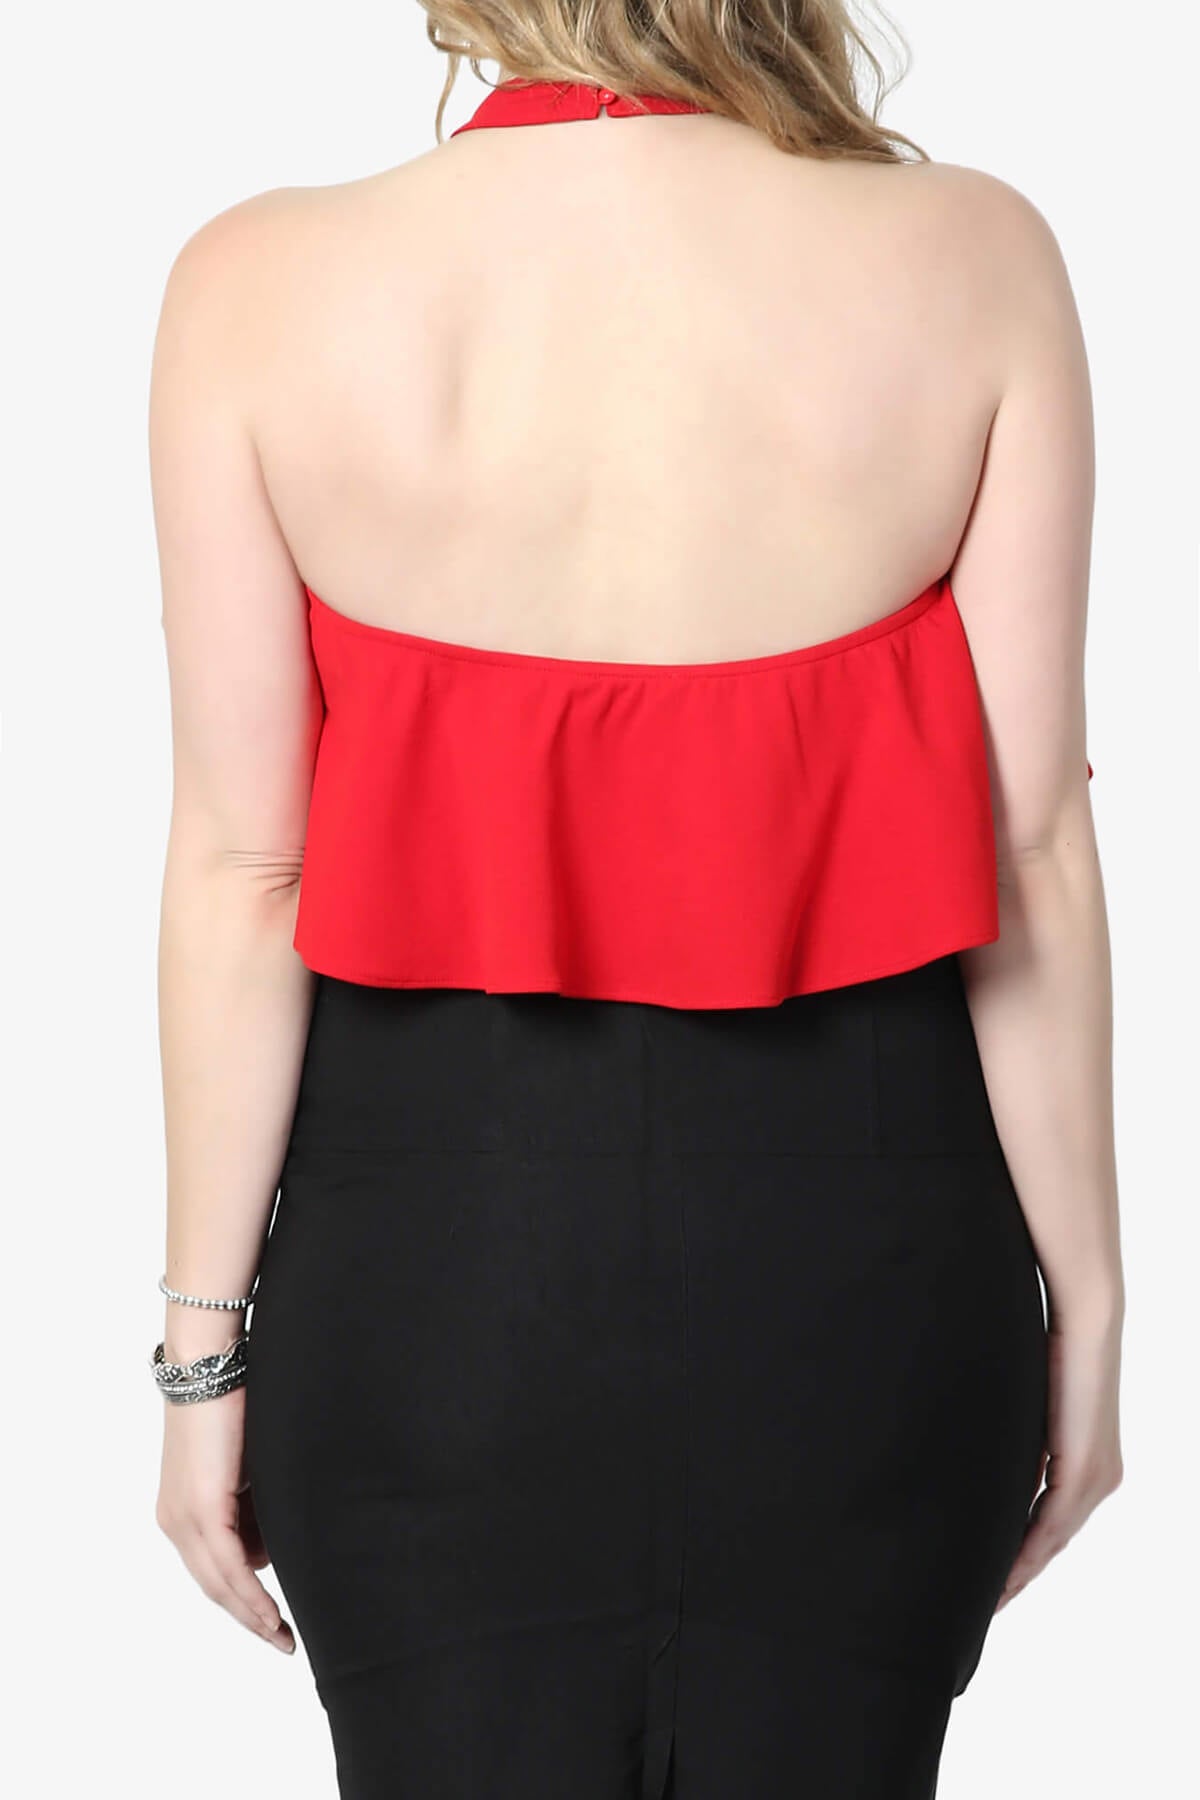 Load image into Gallery viewer, Raquel Ruffle Halter Bodysuit Top RED_2
